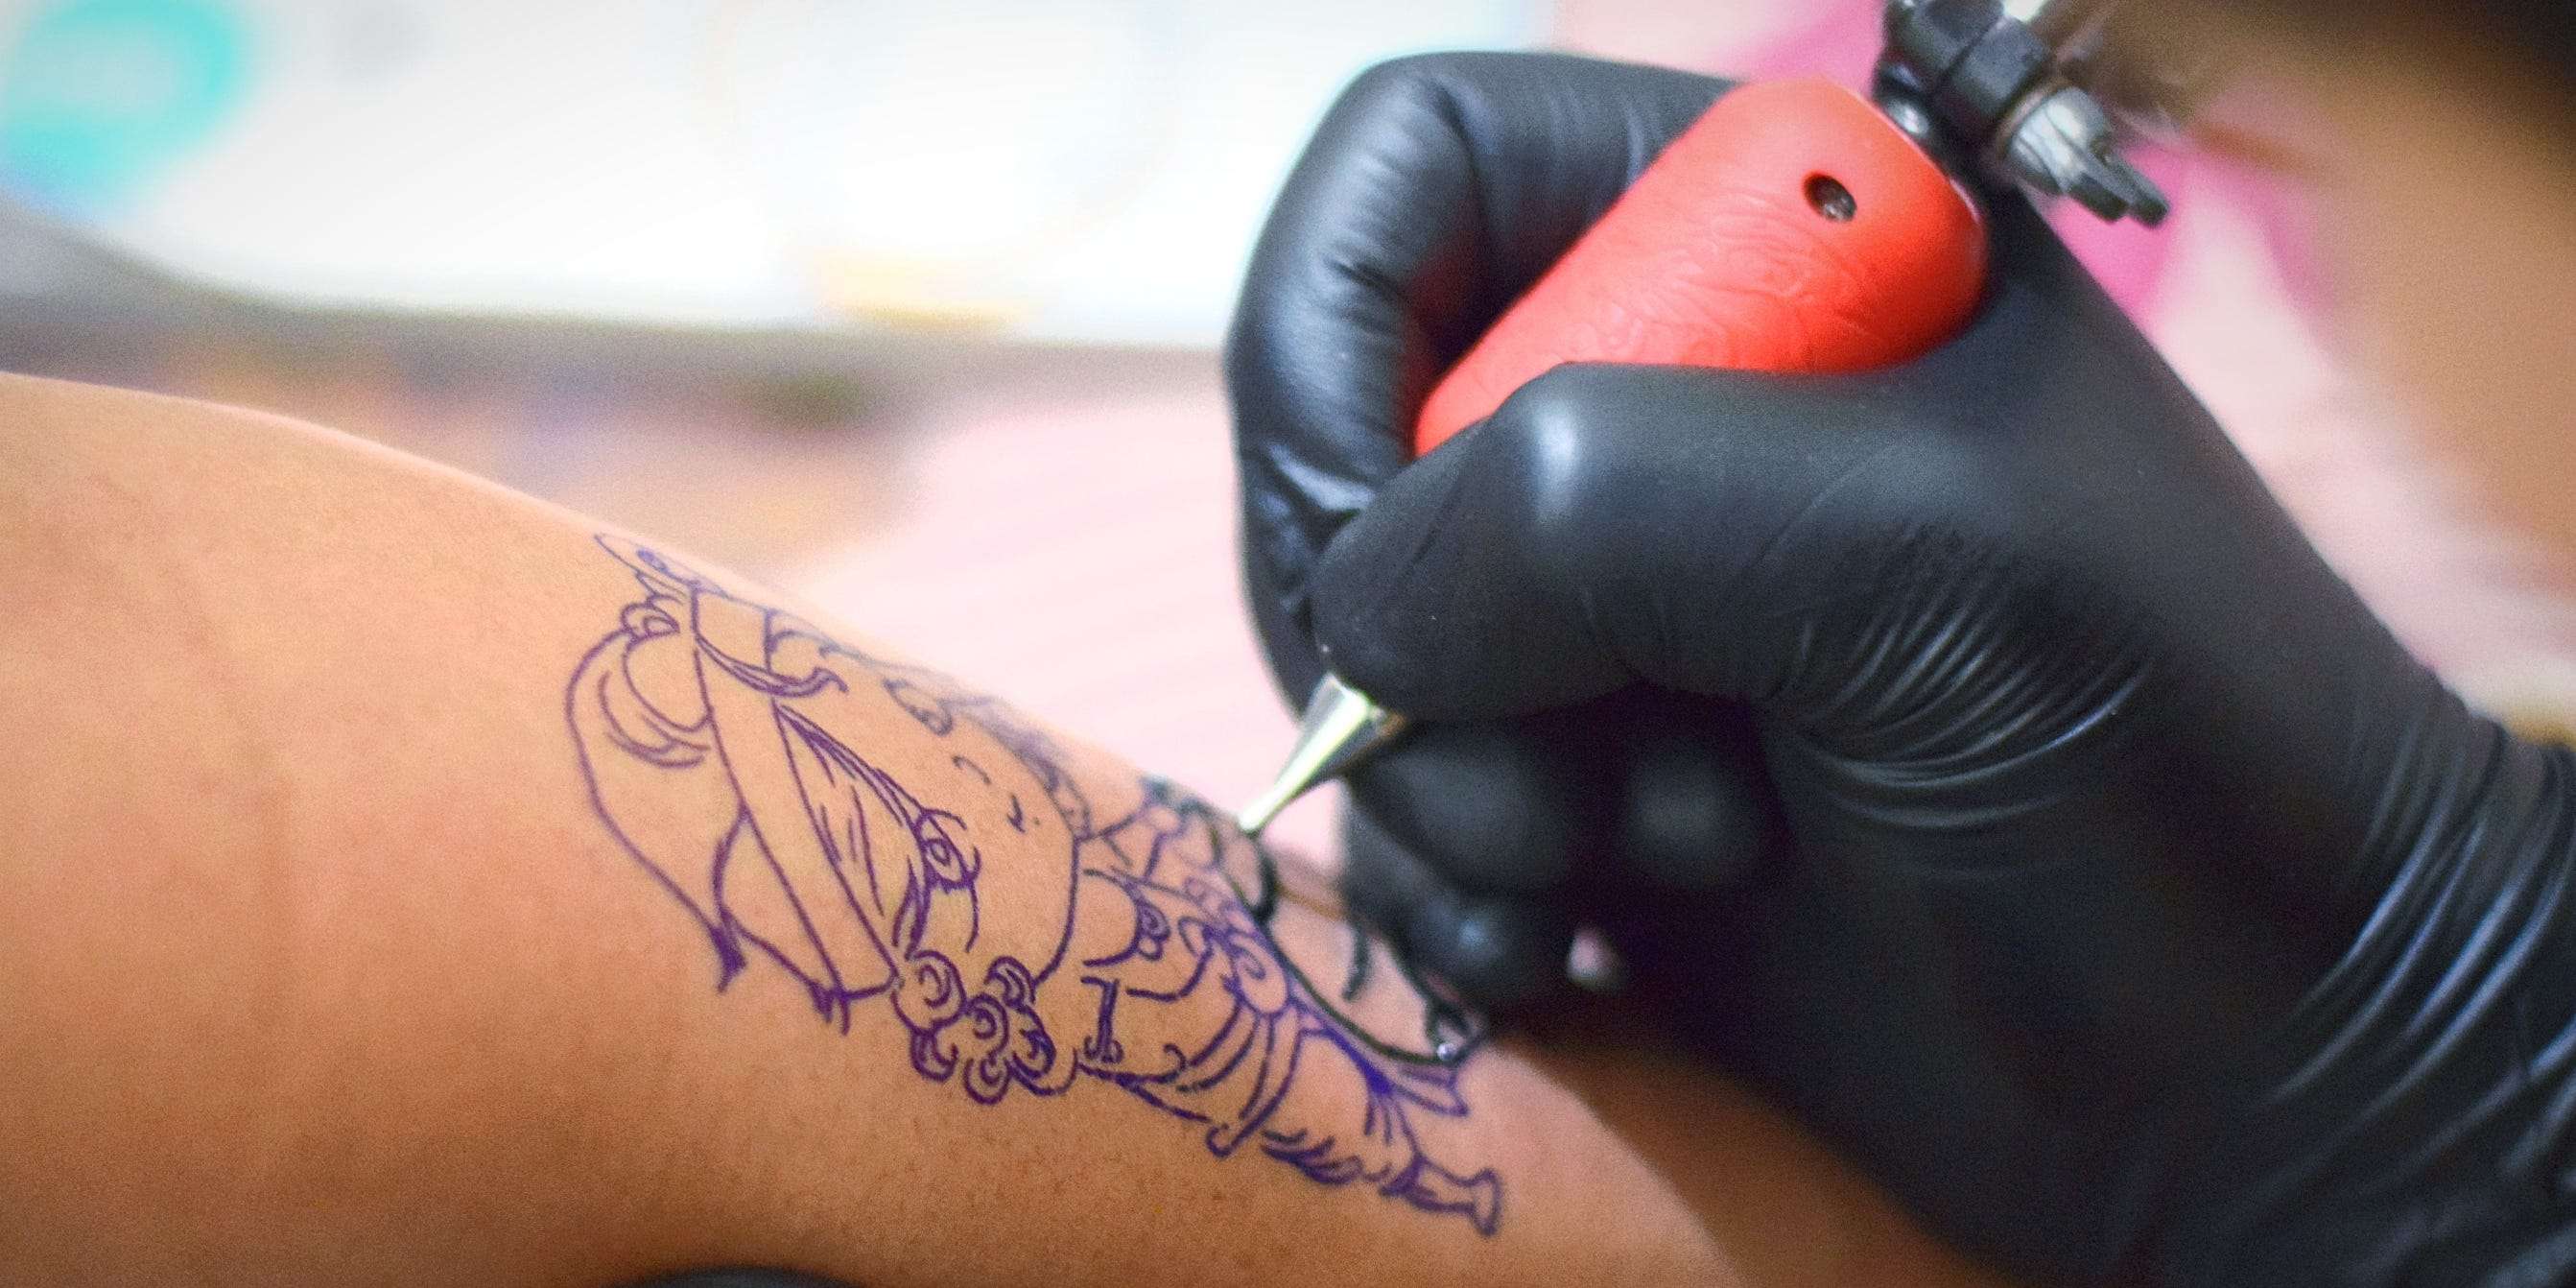 The Rules of Getting Inked, According to a World Famous Tattoo Artist